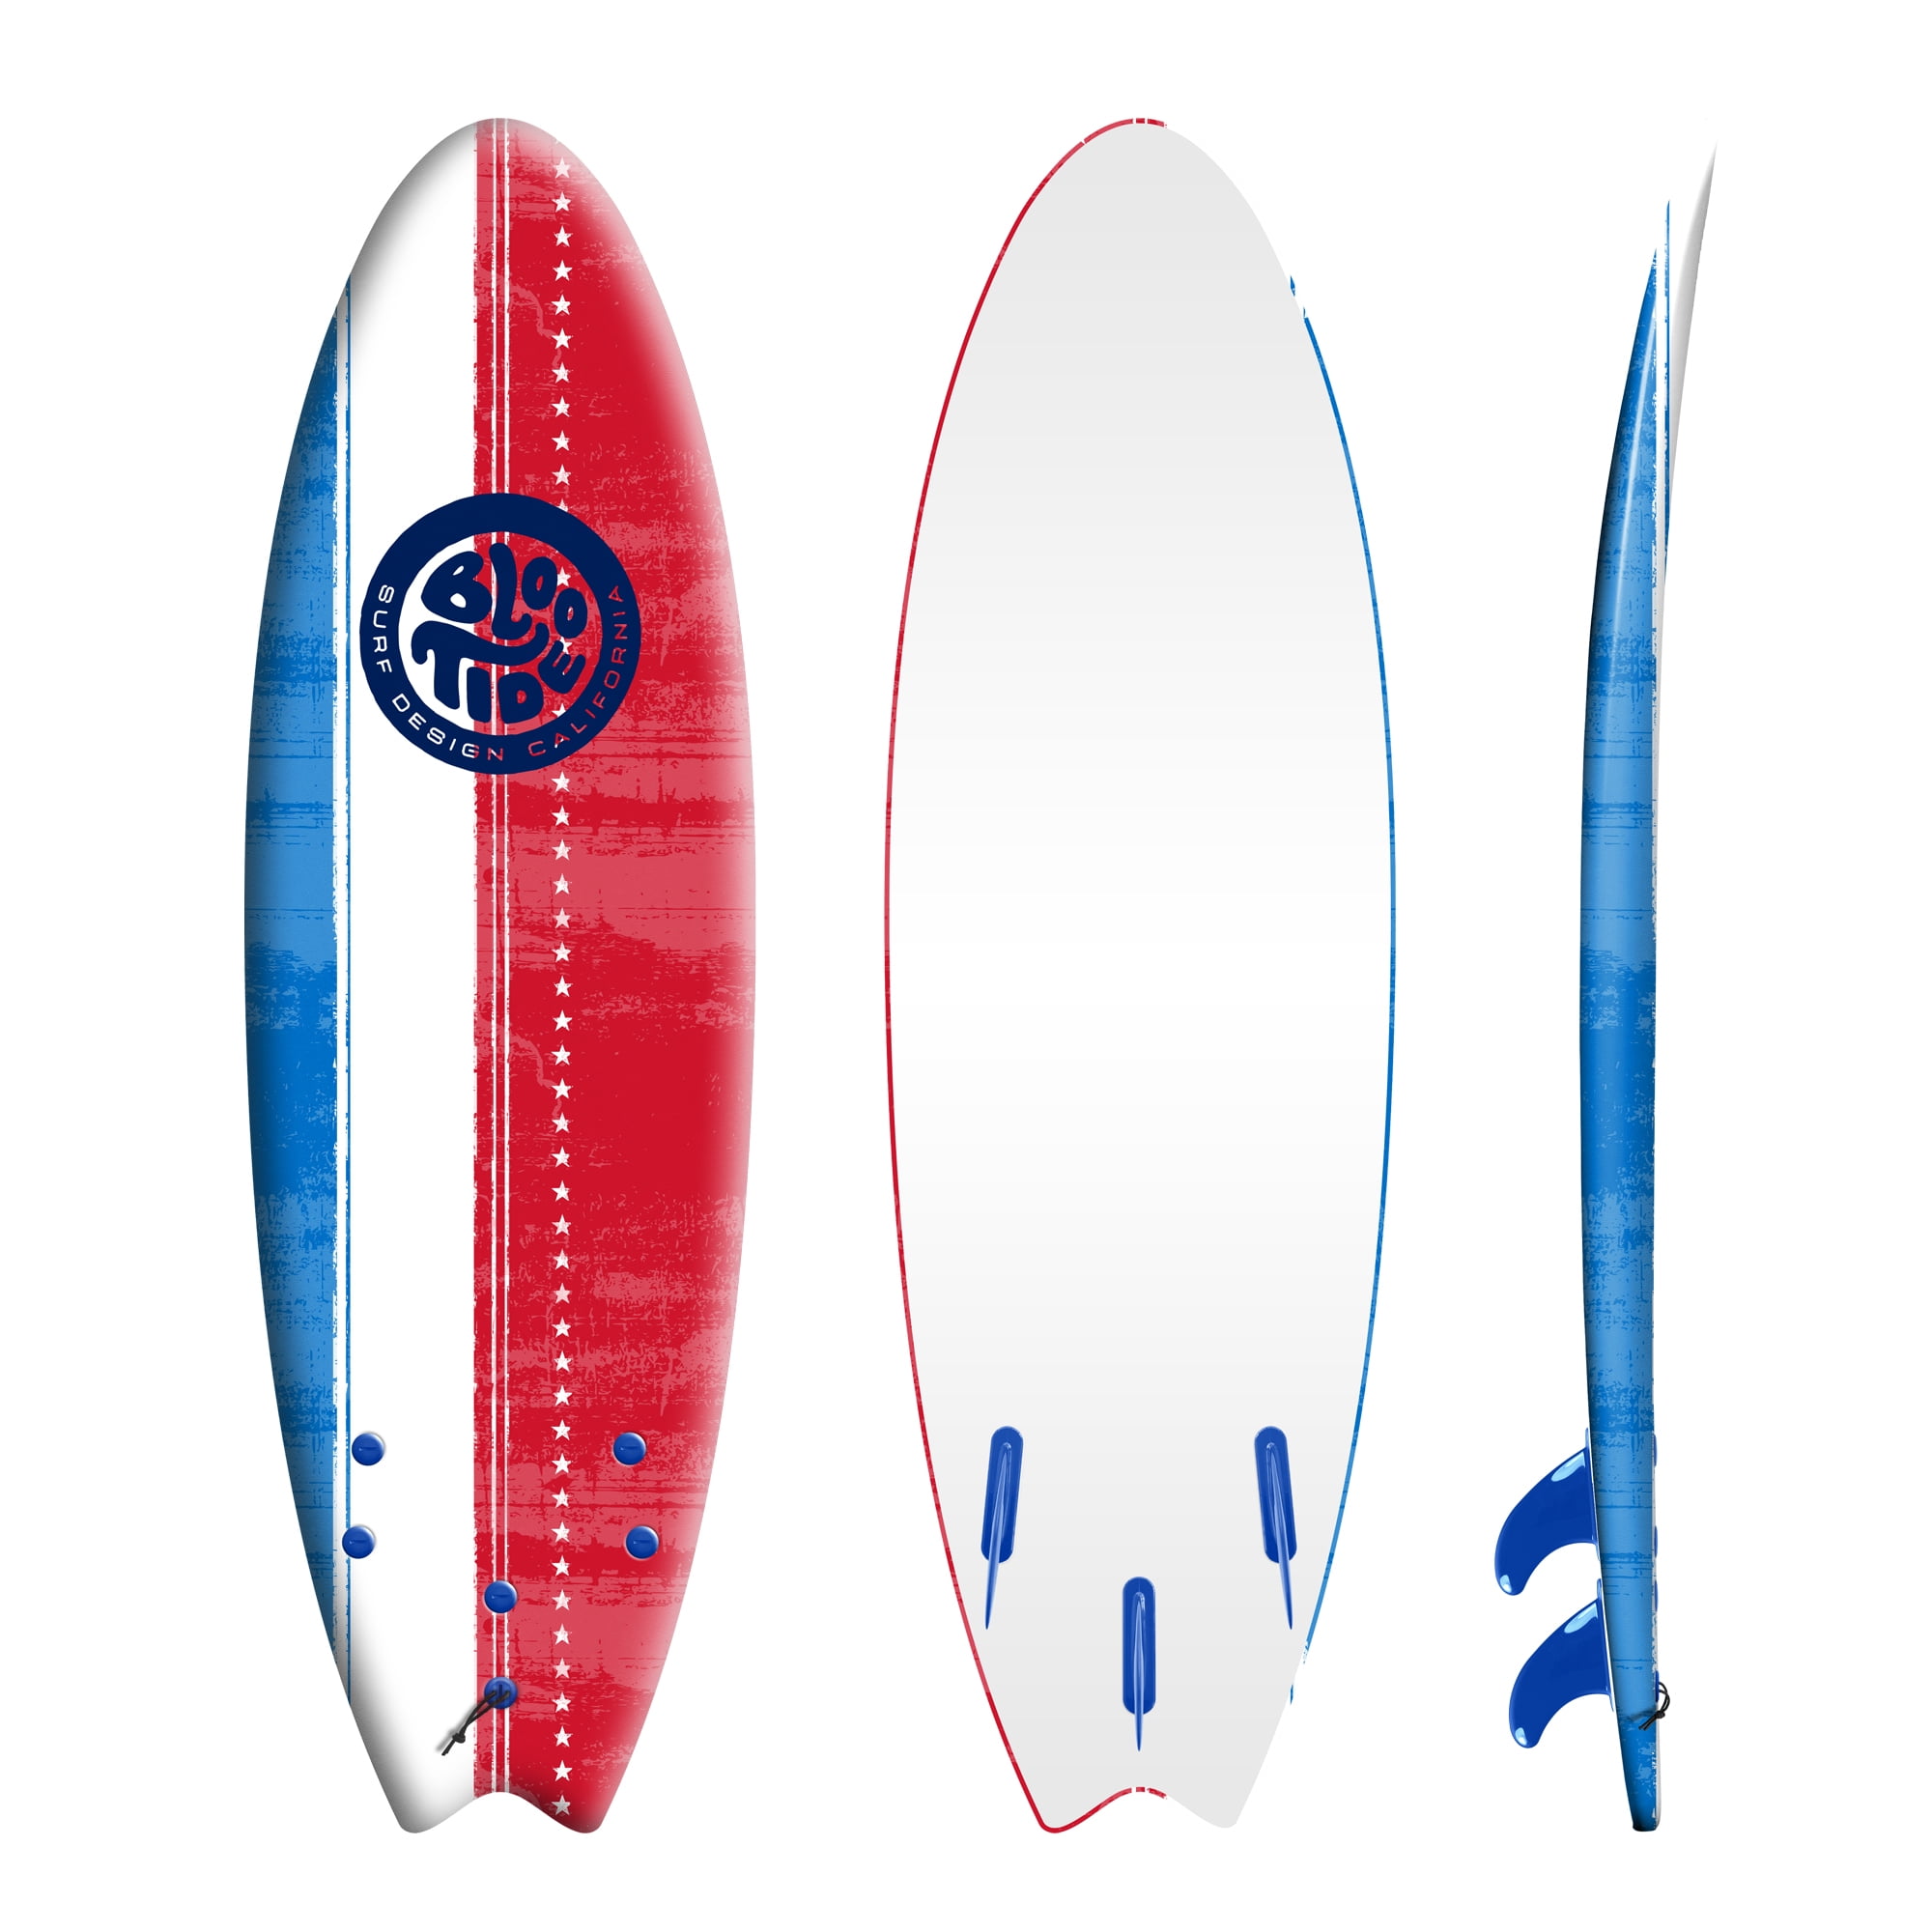 Blue Pinline Wavestorm Classic Soft Top Foam 7ft Surfboard Surfboard for Beginners and All Surfing Levels Complete Set Includes Leash and Multiple Fins Heat Laminated AZ22-WSSF700-PIN 